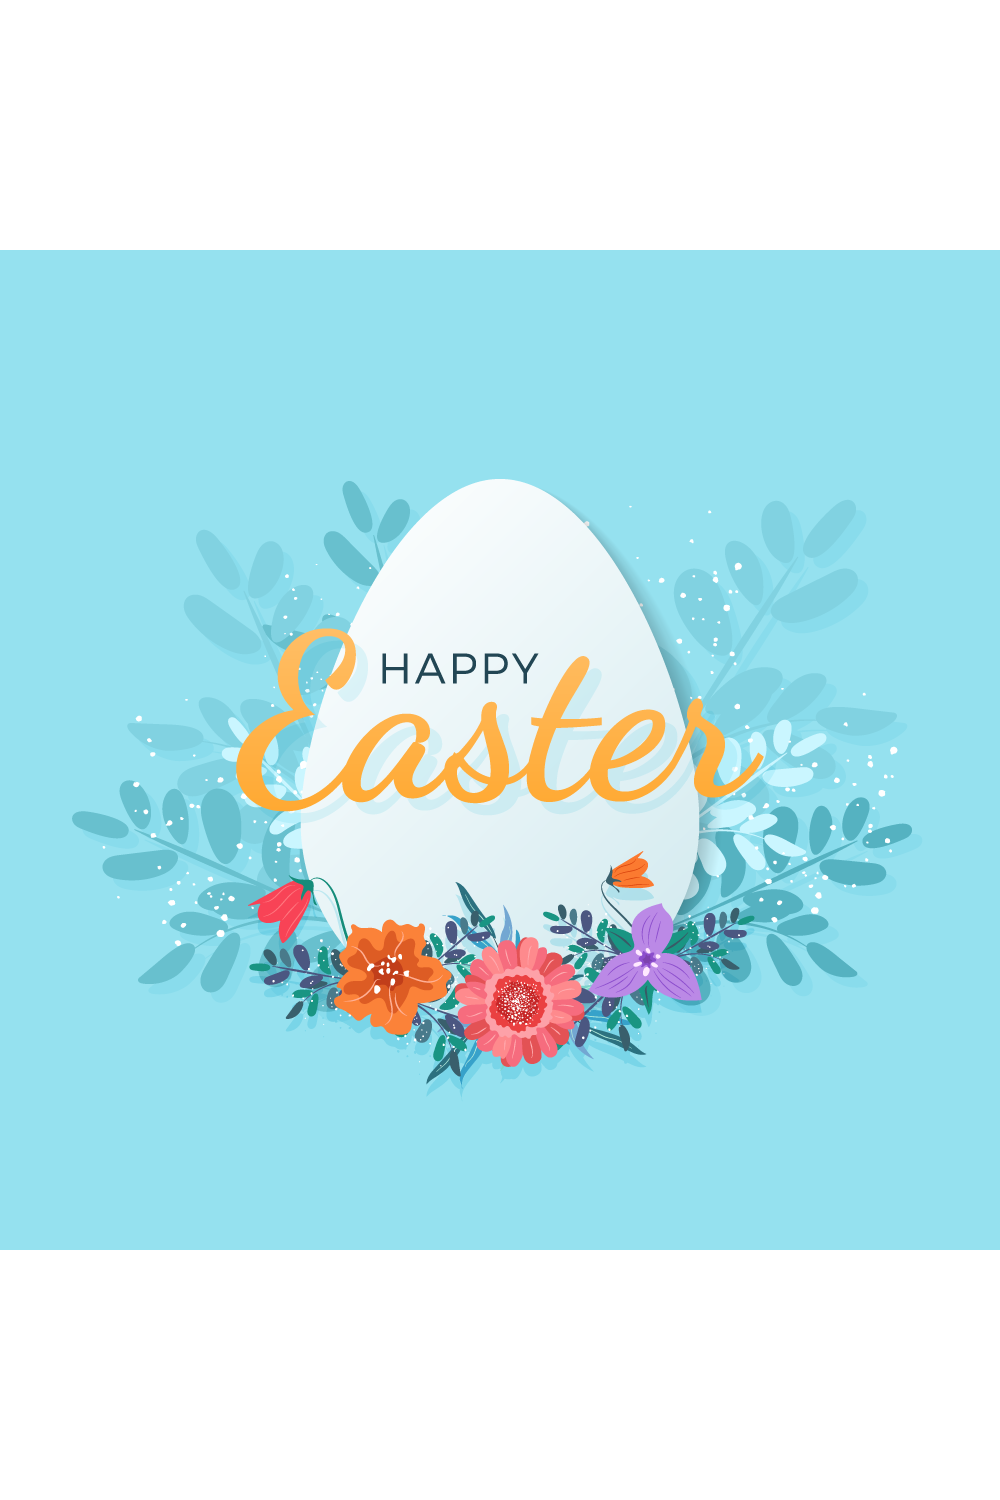 Happy Easter vector banners with Easter egg, bunny, flowers and herb pinterest preview image.